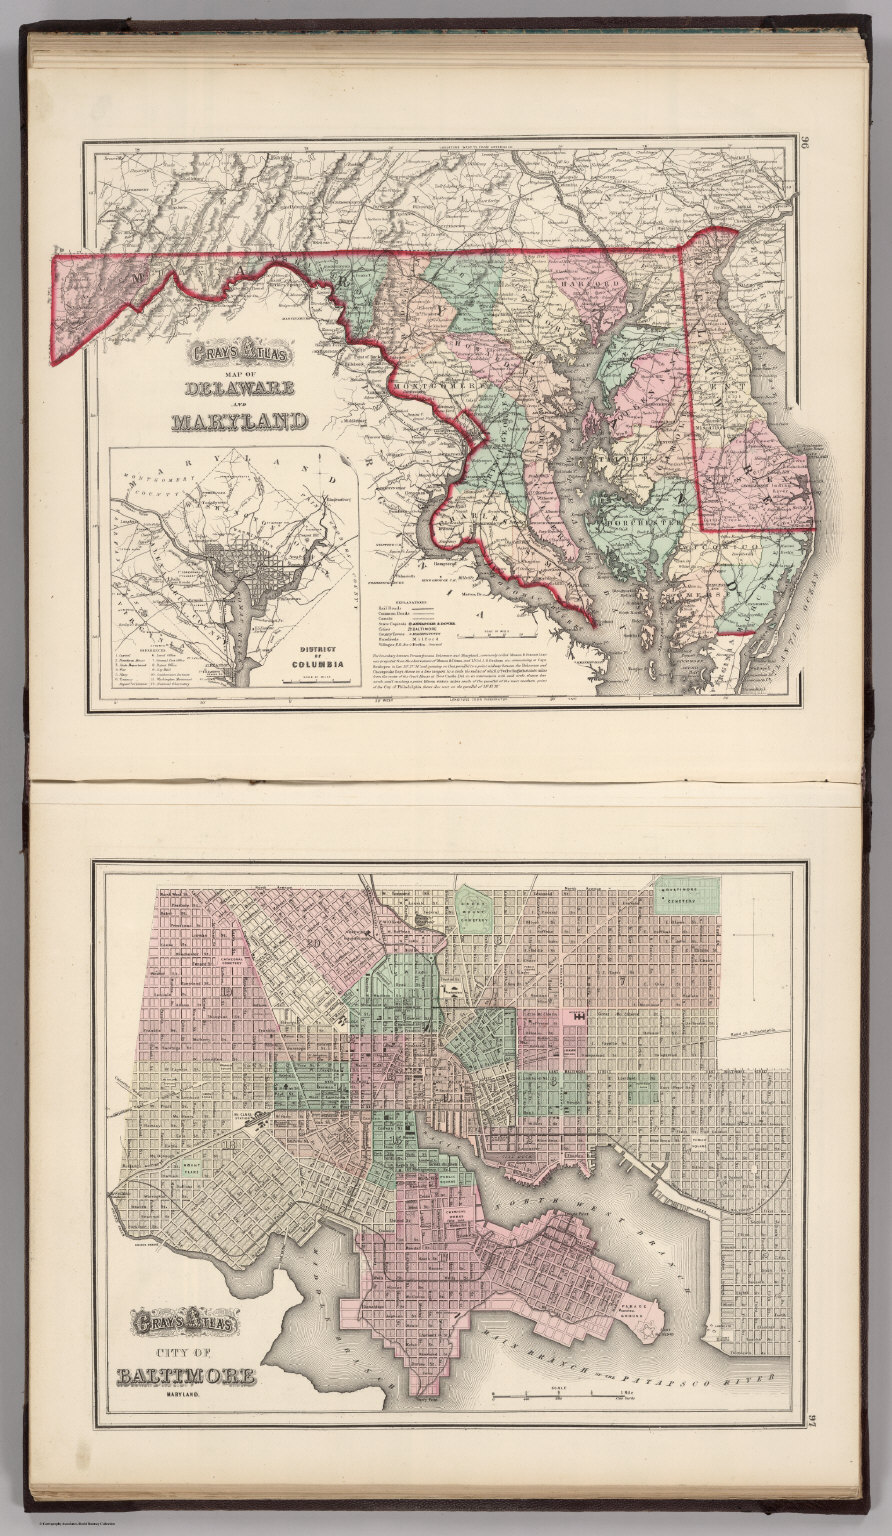 Delaware and Maryland. Baltimore. - David Rumsey Historical Map Collection